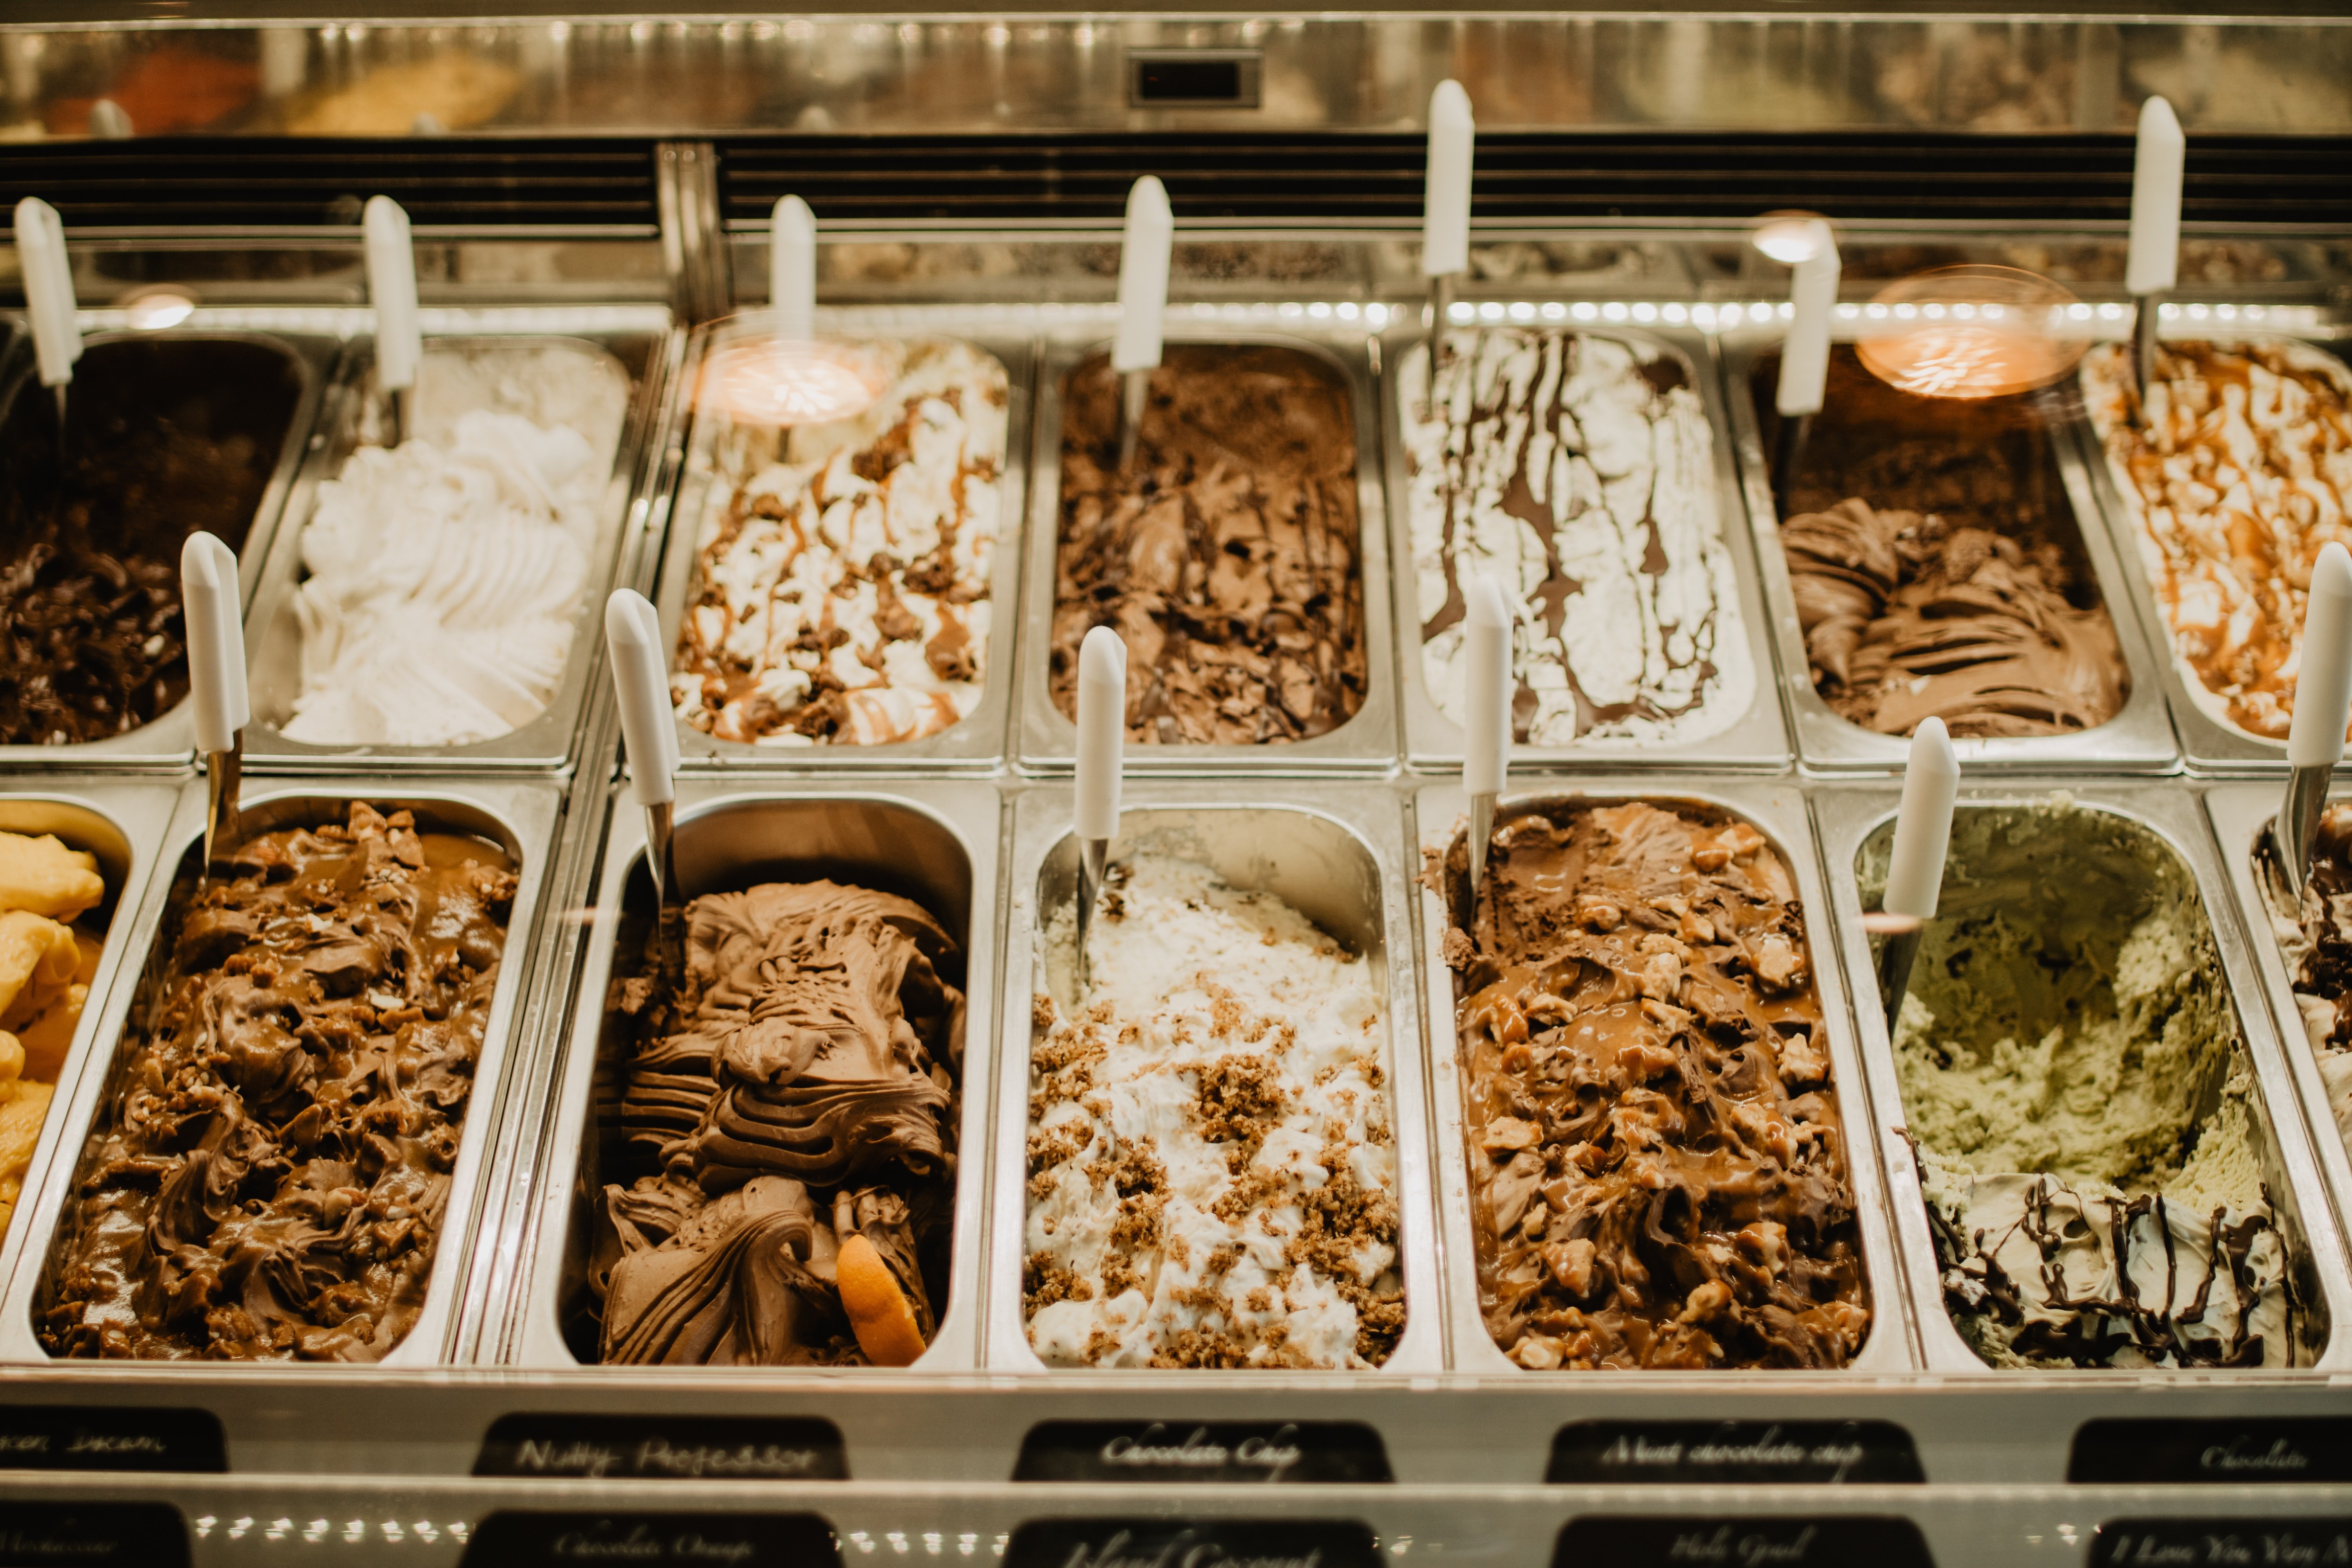 Peter really wanted to get some ice cream. | Source: Pexels